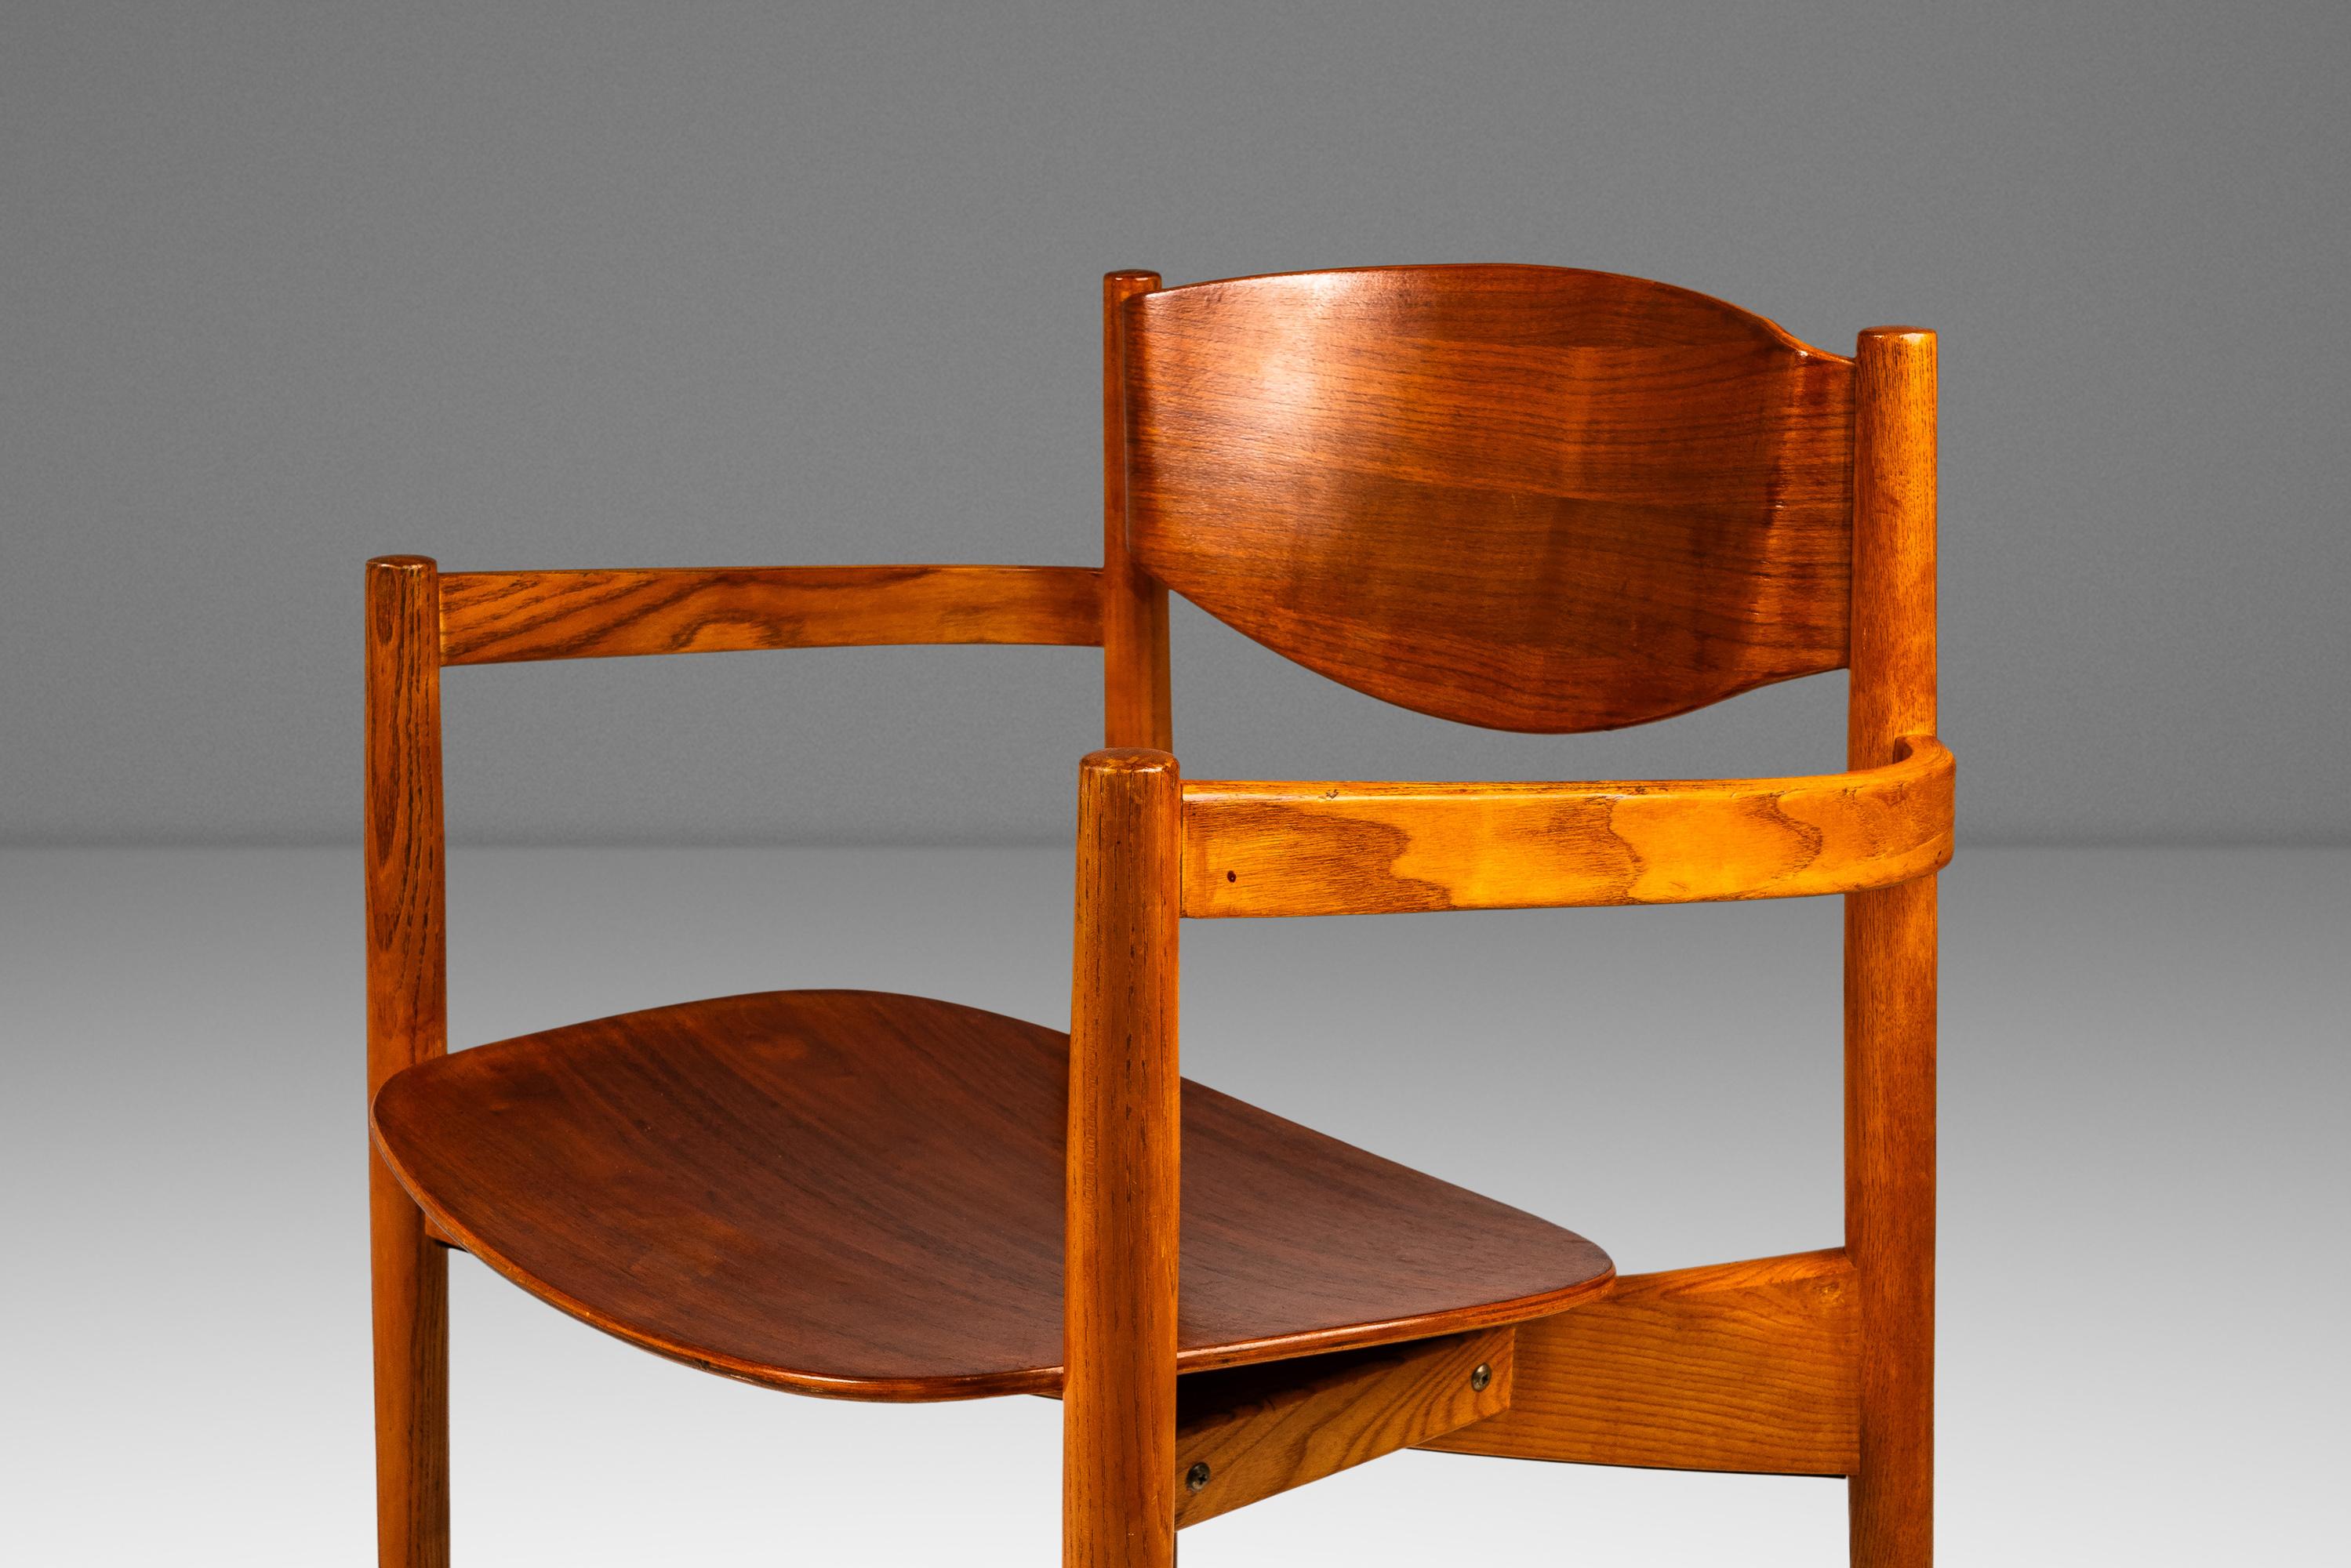 Set of 2 Stacking in Oak & Walnut Chairs by Jens Risom, USA, c. 1960s For Sale 7